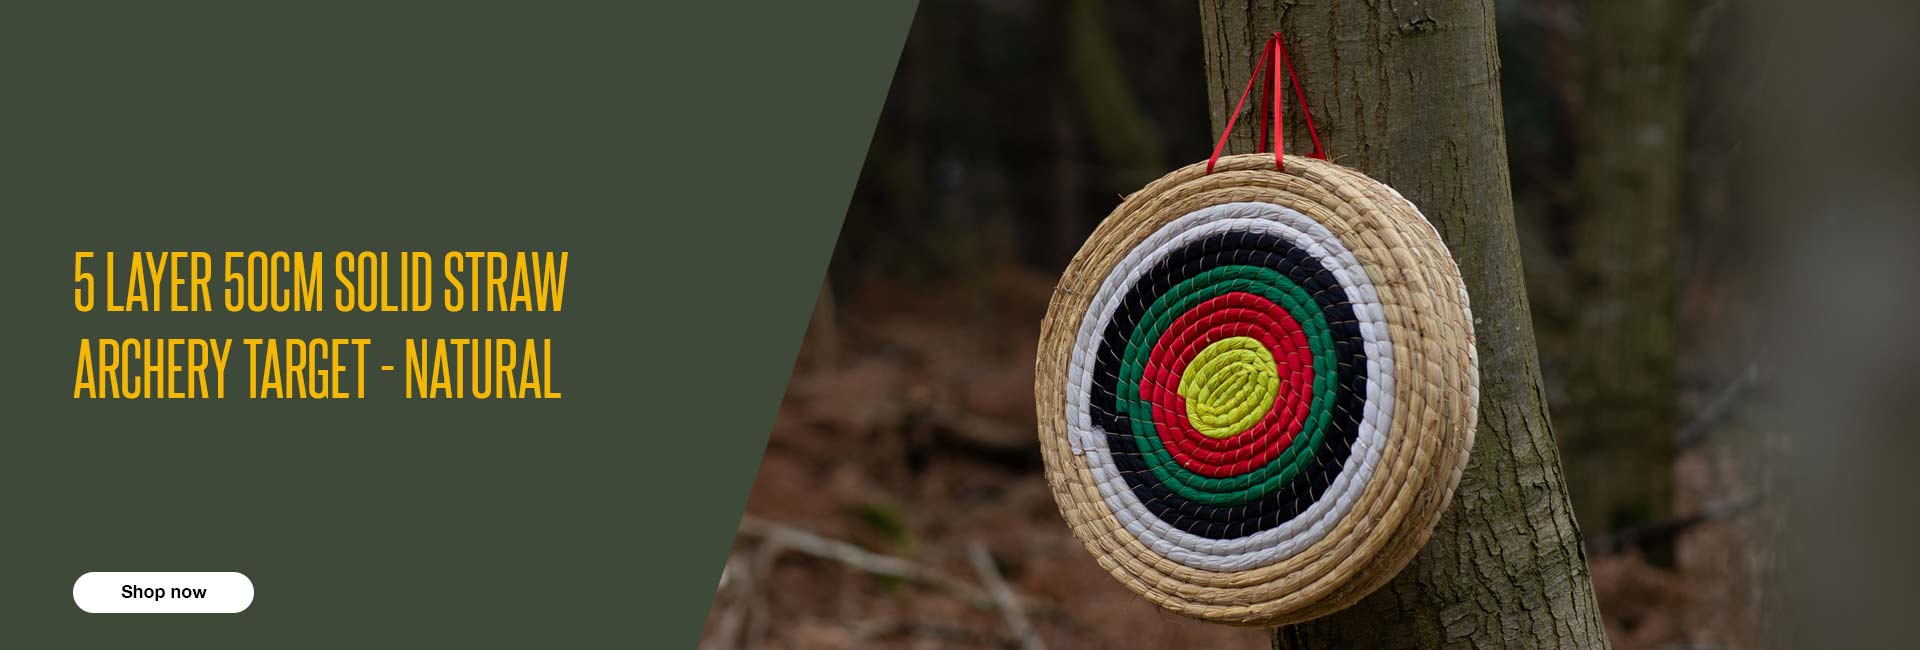 Traditional Round Solid Straw, 5 Layer 50cm Natural Archery Target